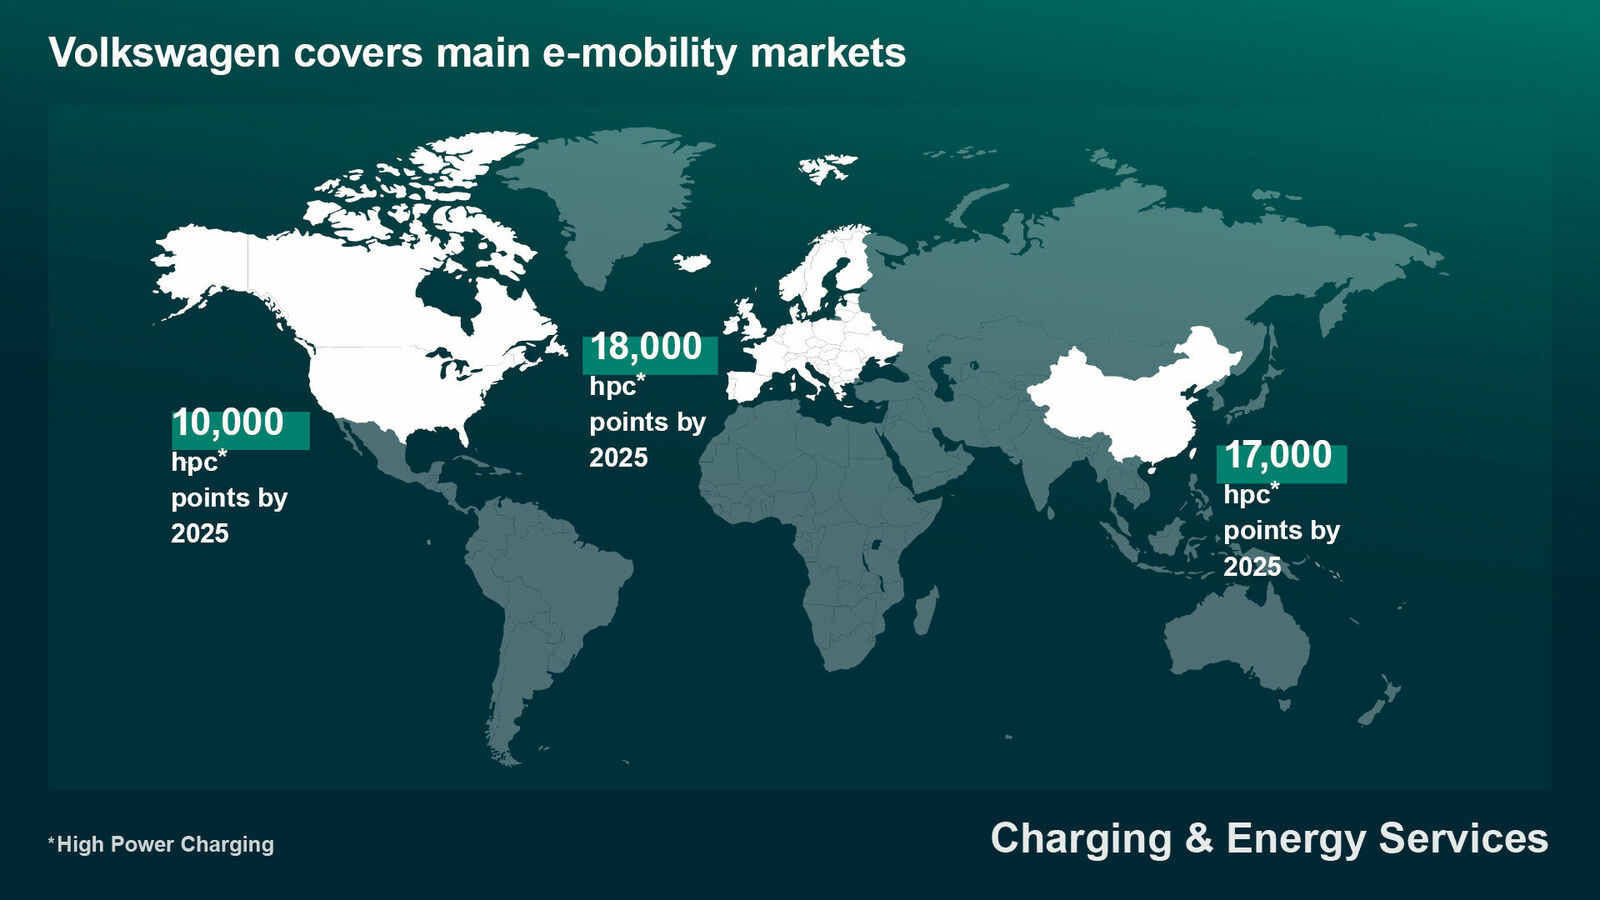 Volkswagen covers main e-mobility markets